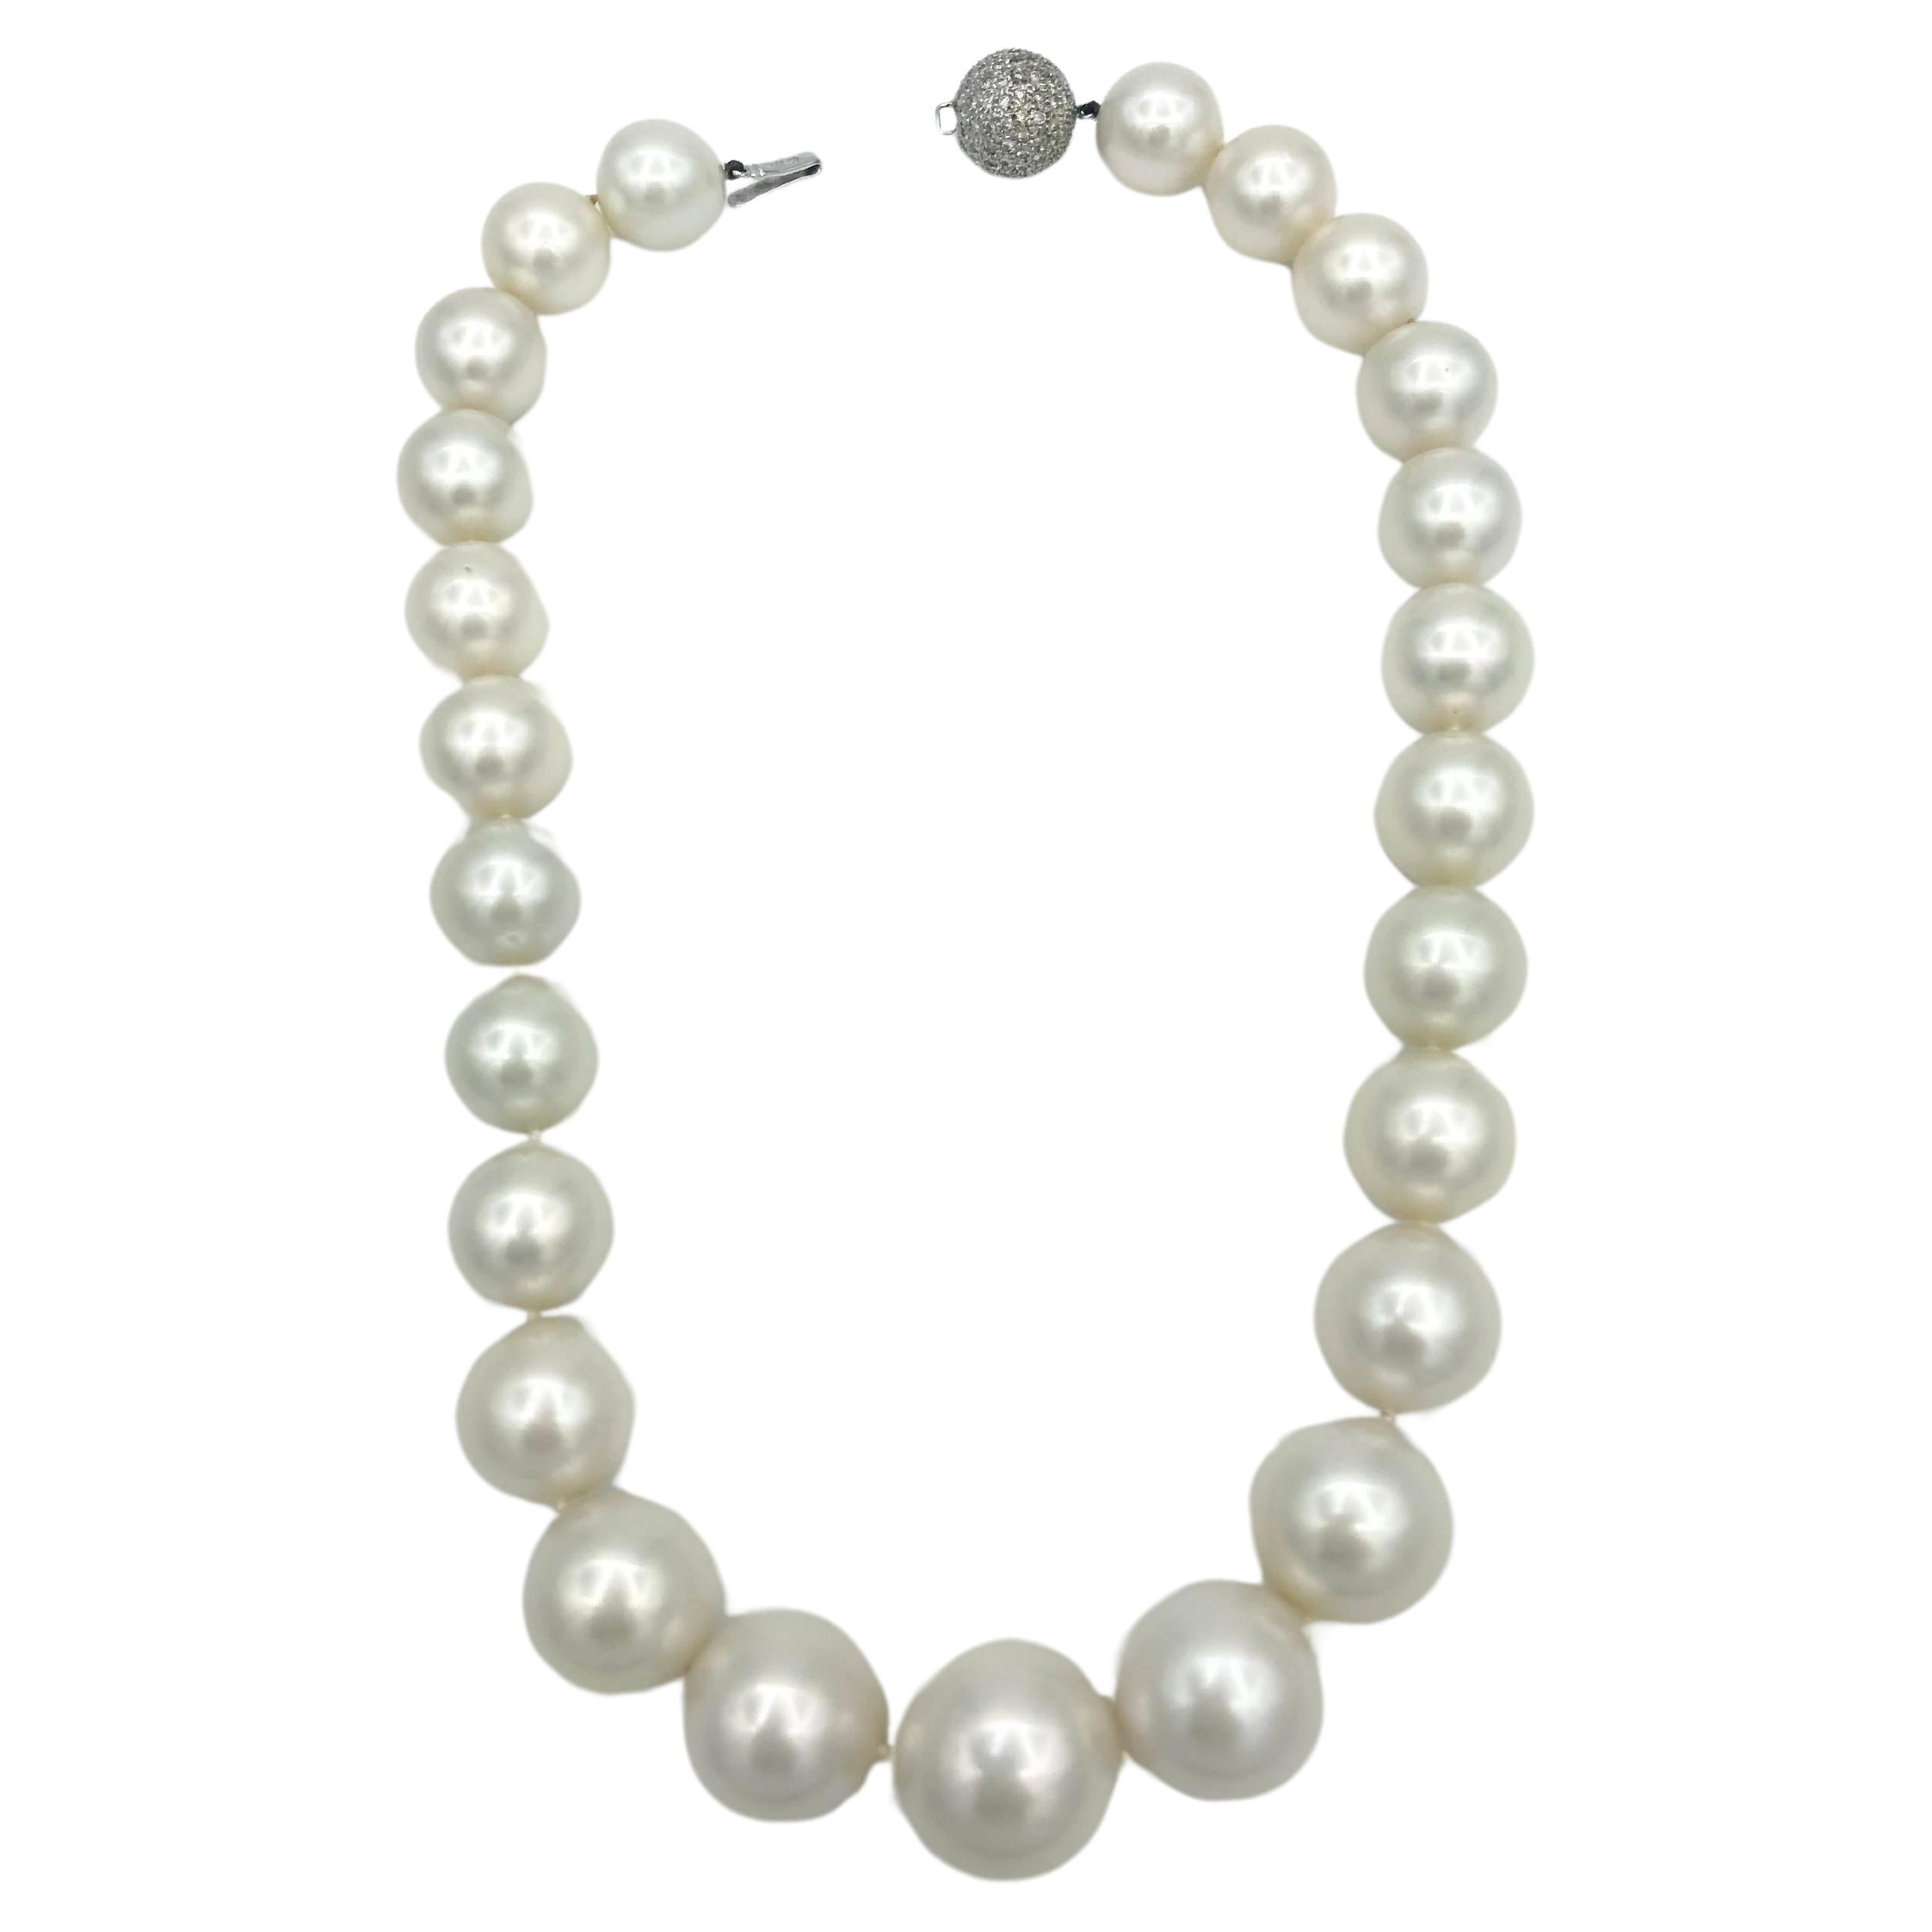 Rare 15-20mm South Sea Pearl Necklace For Sale